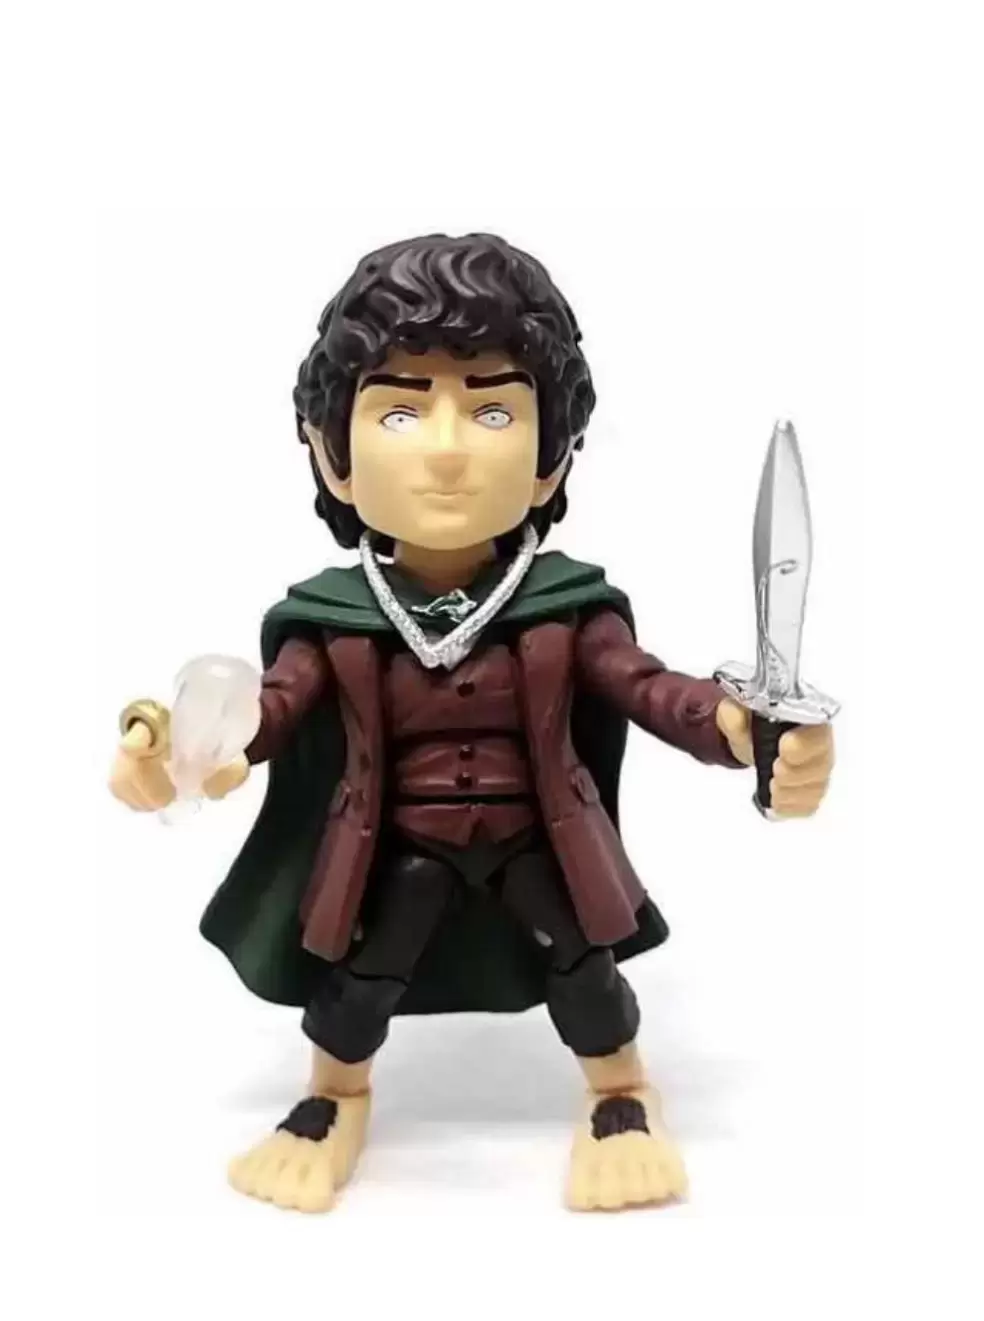 The Lord of the Rings - Frodo Baggins (Wraith)